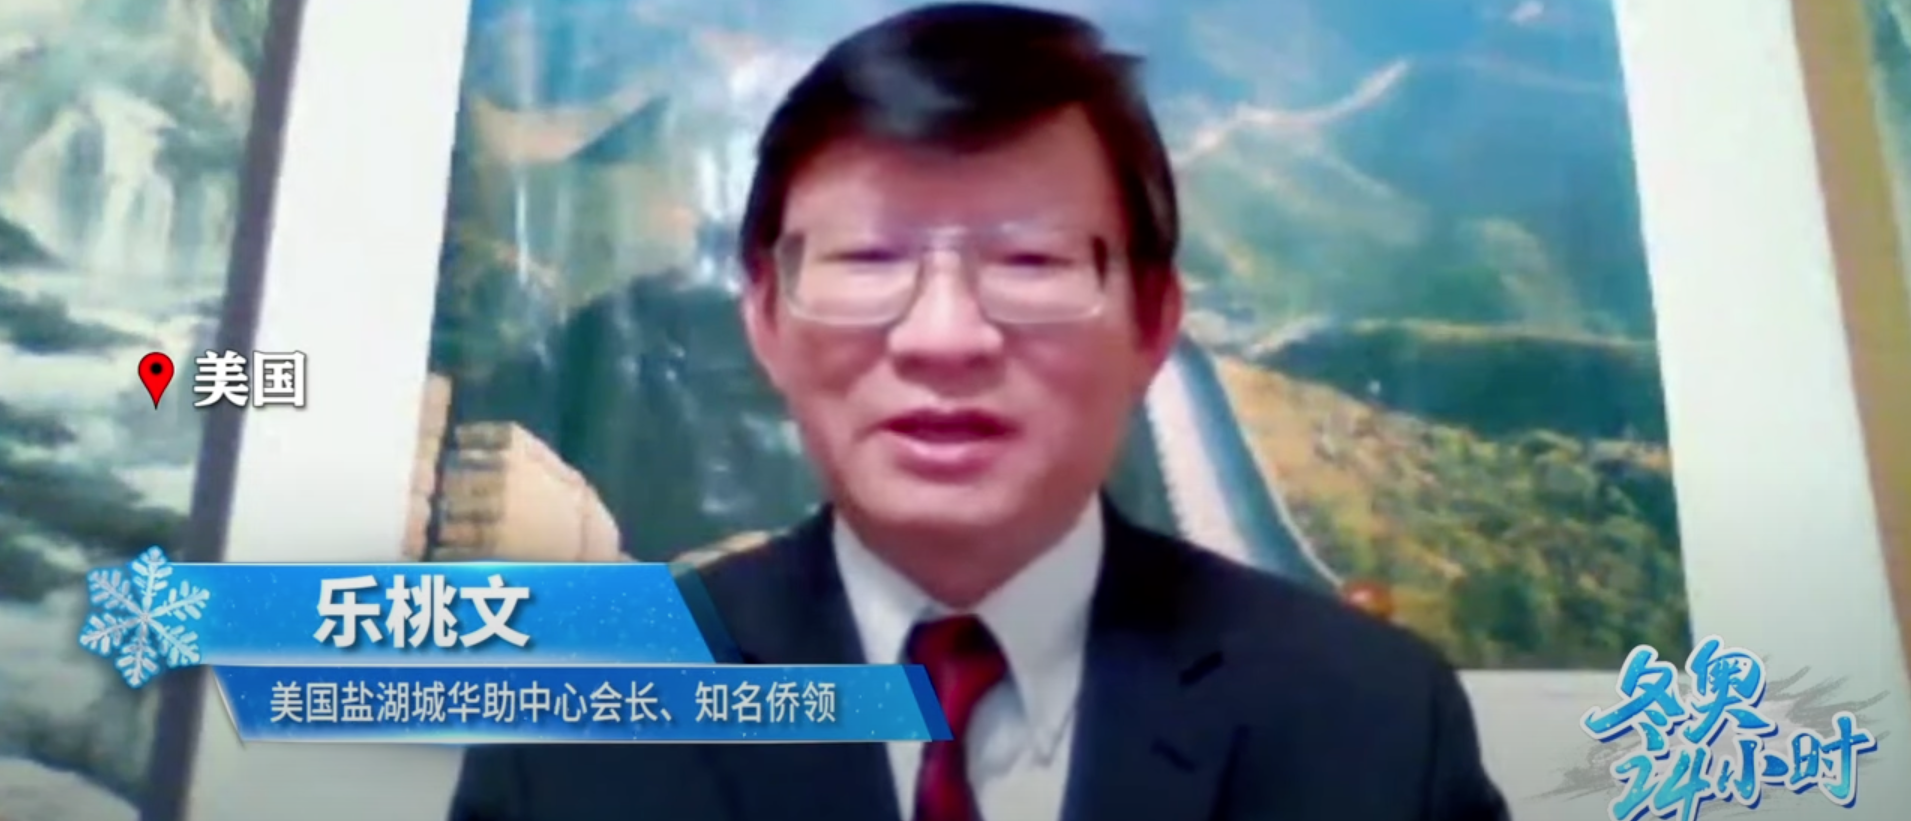 Le Taowen, tenured professor at Weber State College, president of the Utah Chinese Civic Center and a member of the China Overseas Friendship Association, an alleged CCP intel front group. [Screenshot/YouTube/中国新闻社]